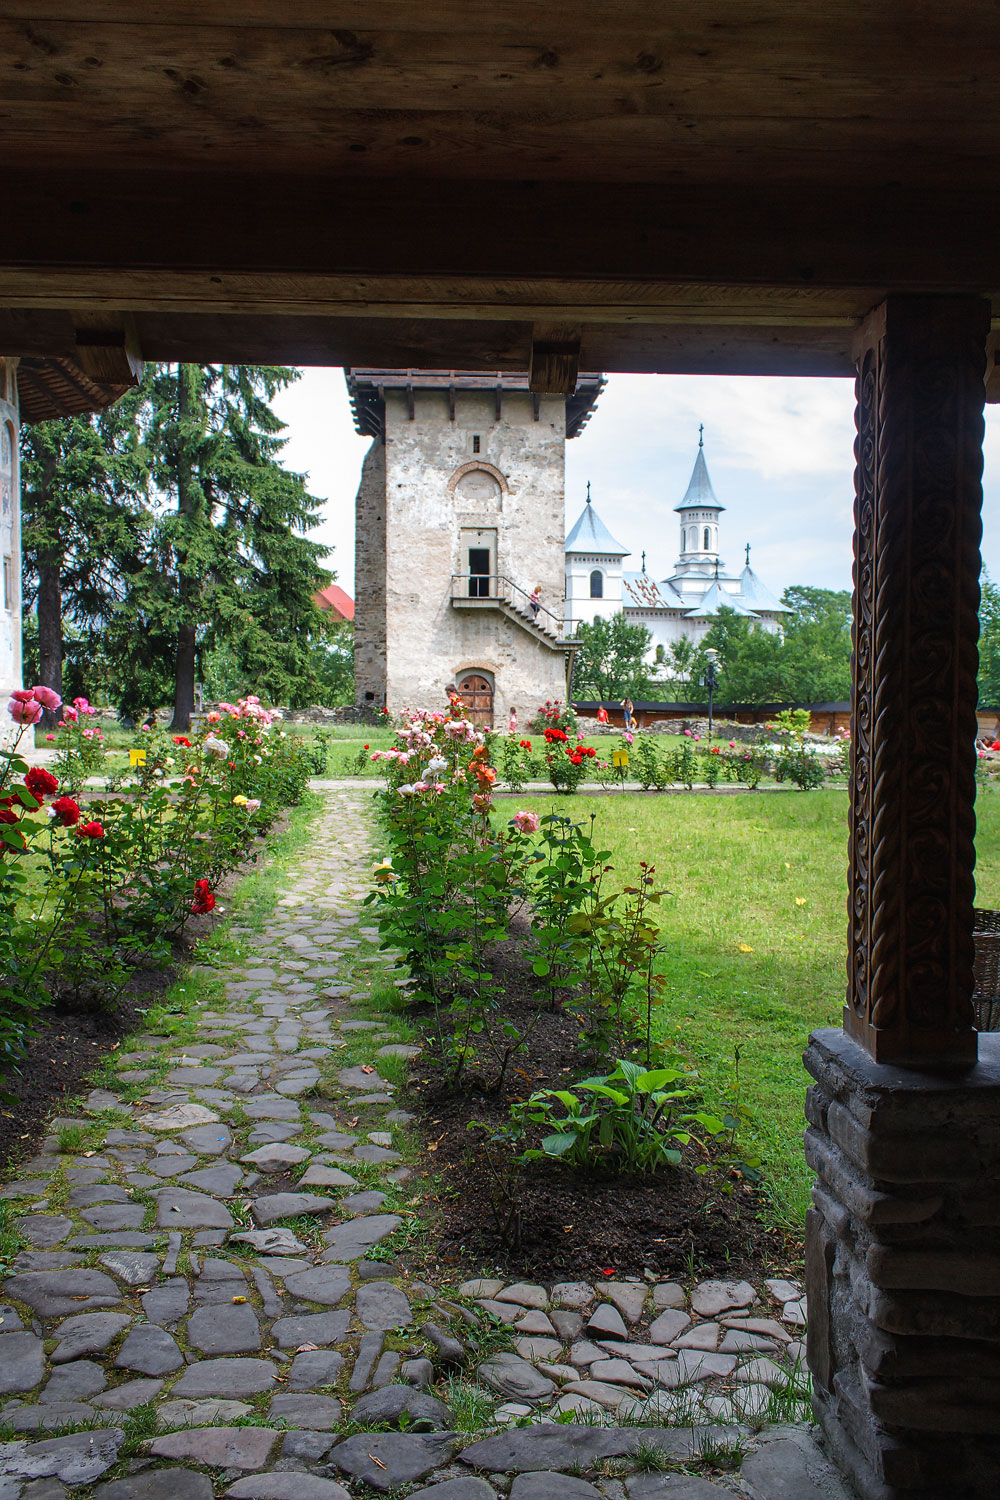 Architecture and details of a Moldavian monastery